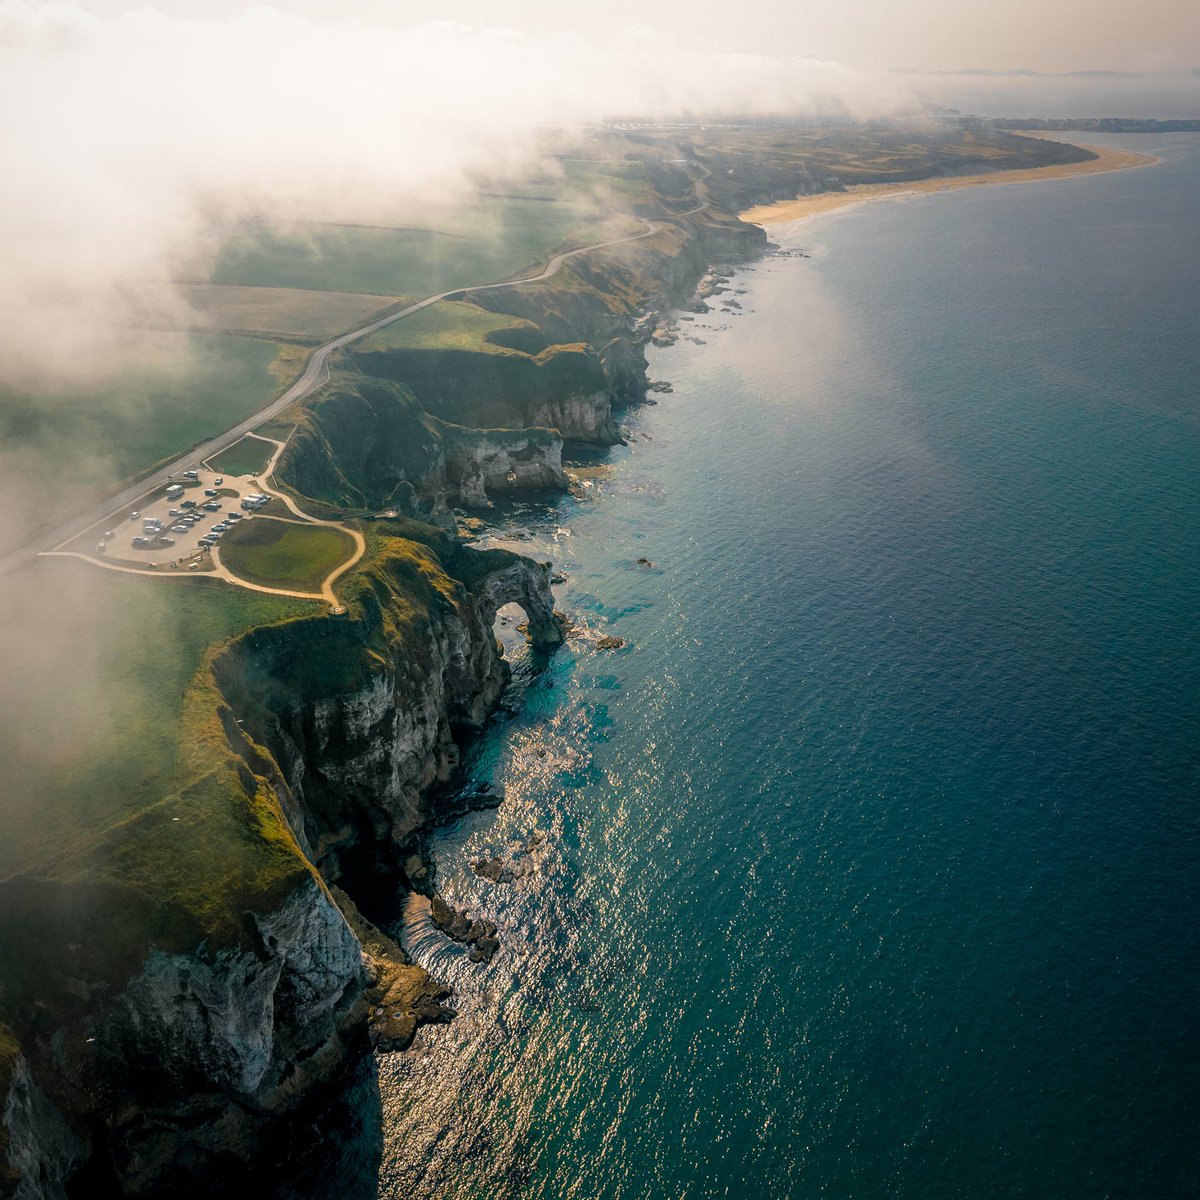 The shrouded coast

The white rocks before Whiterocks smothered in a blanket of sea mist. 

Will have to try harder to block the view of those new viewing platforms though!

#discoverNI #causewaycoastalroute #irish_daily #thefullirish_ #ig_ireland #ukshots #visitcauseway